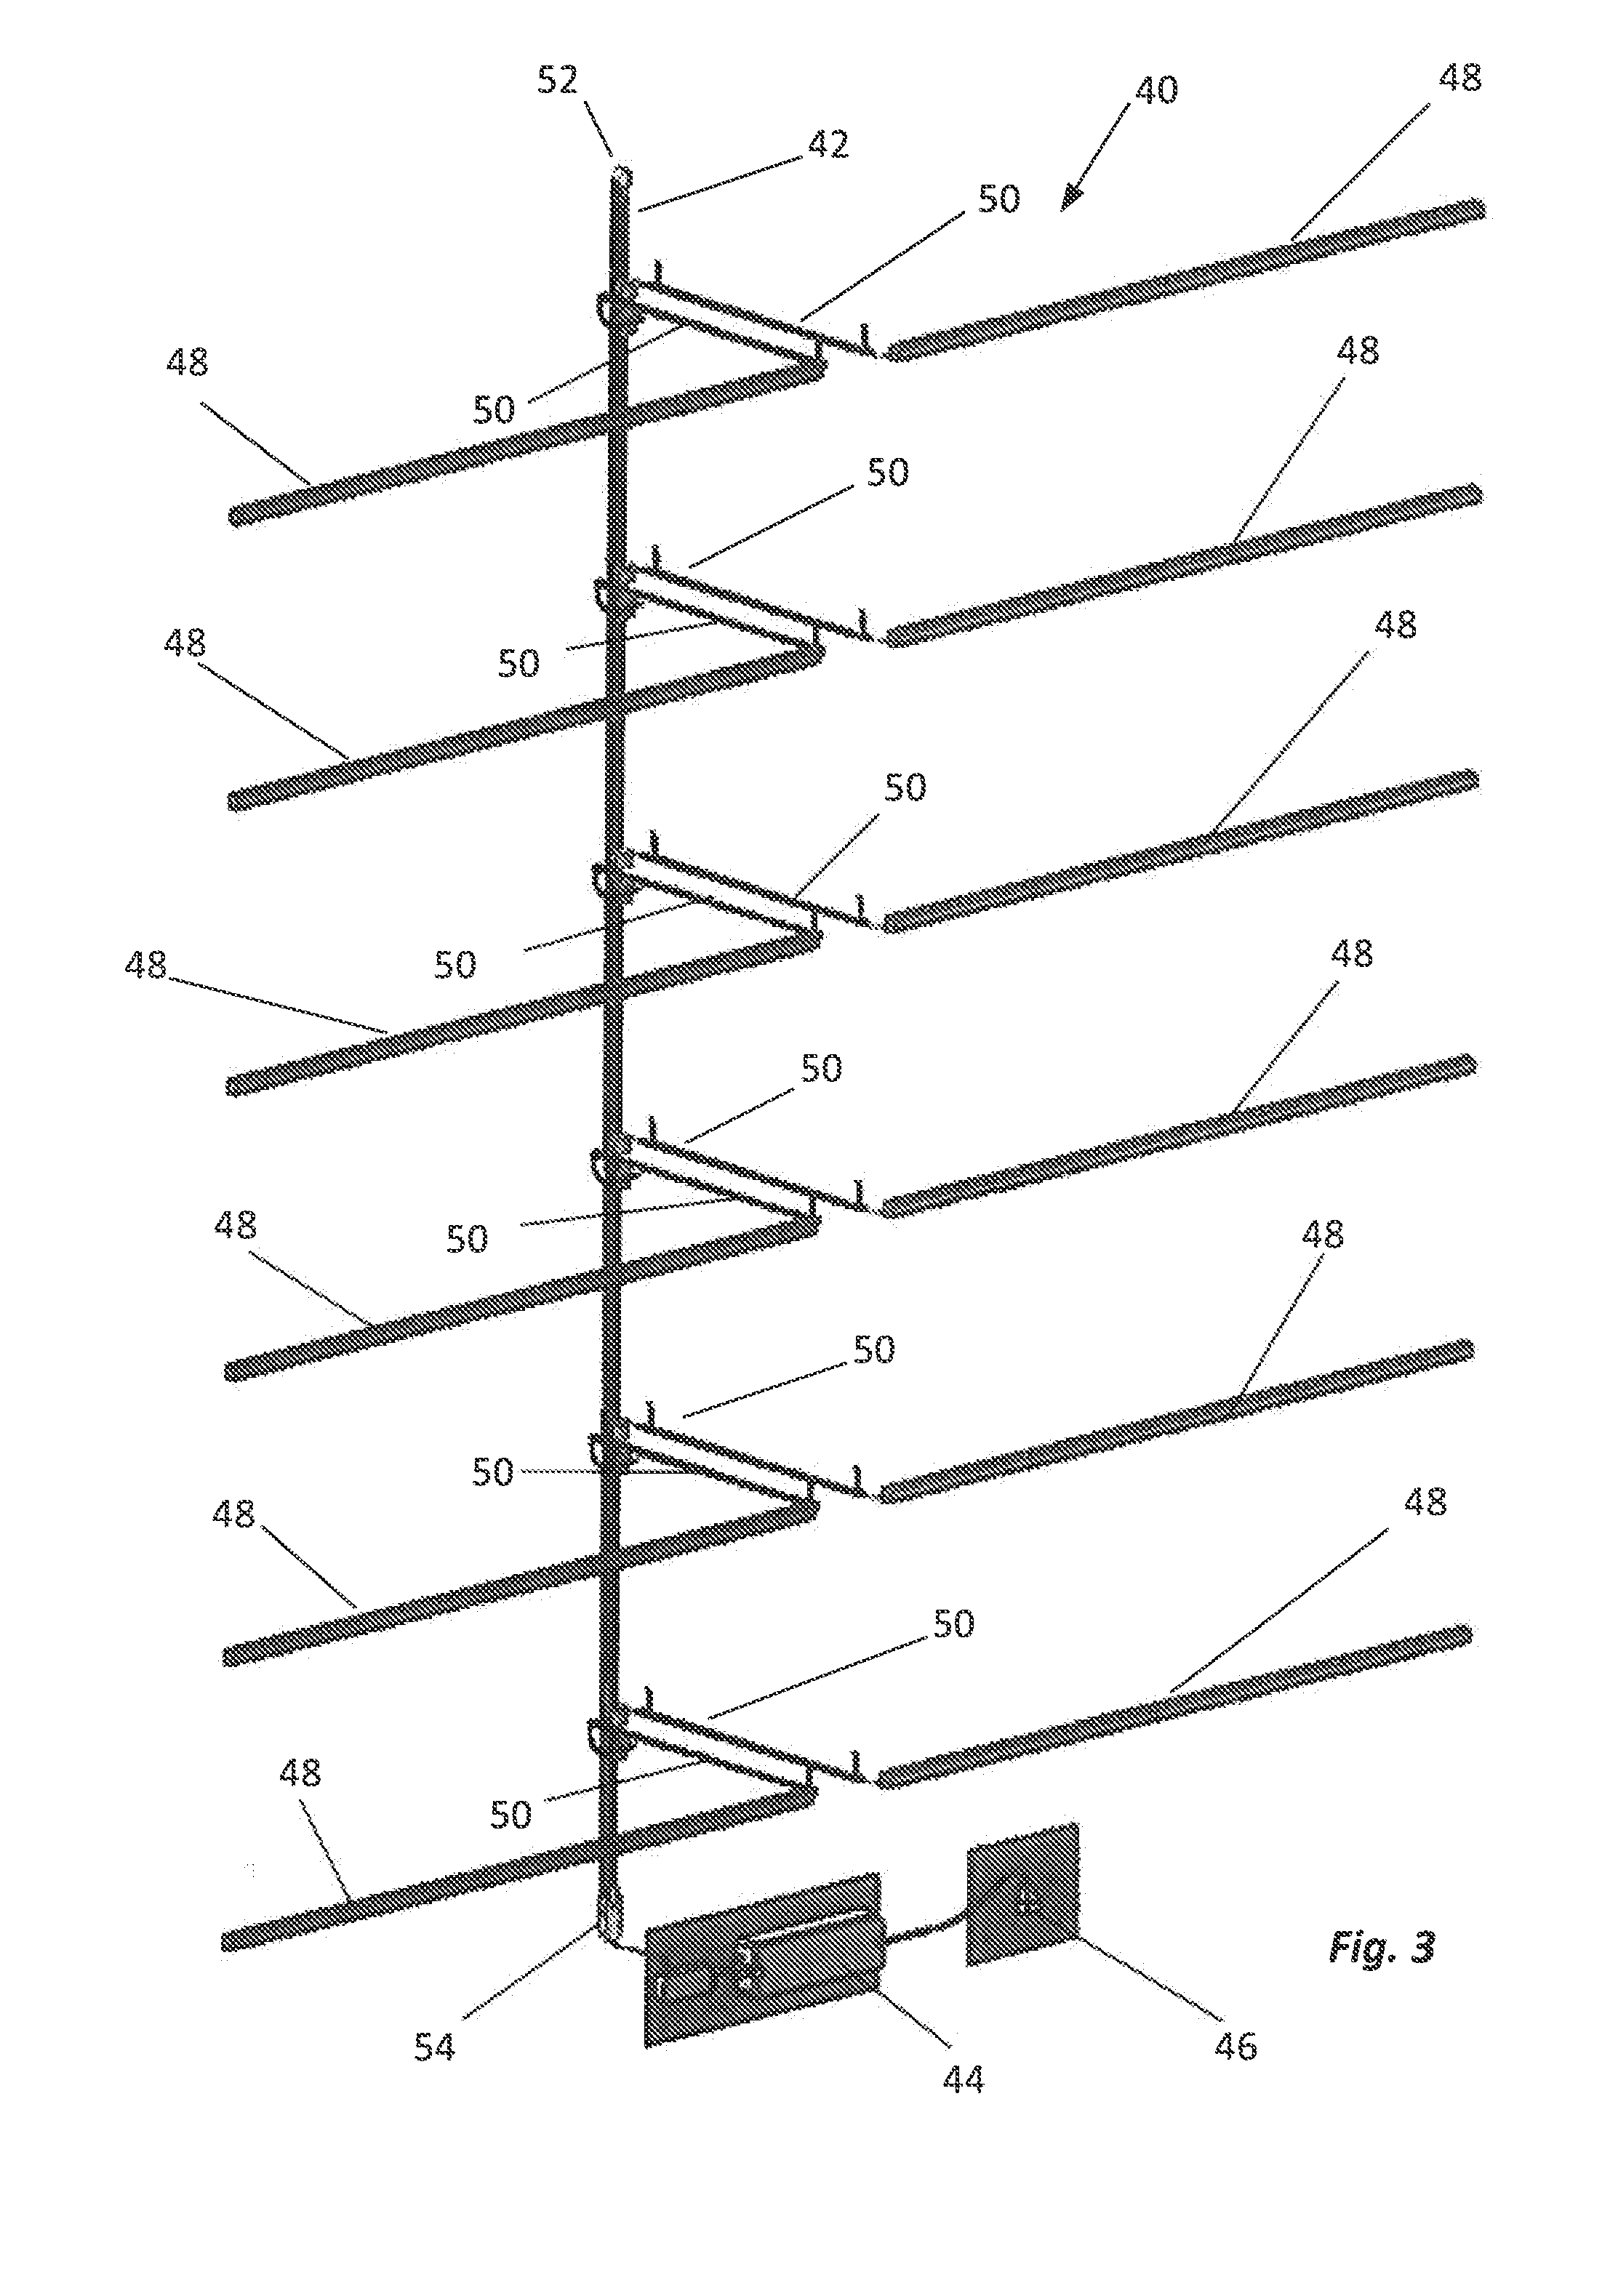 Electrical Assembly for Connecting Components of a Lighting System for Illuminating Store Shelving